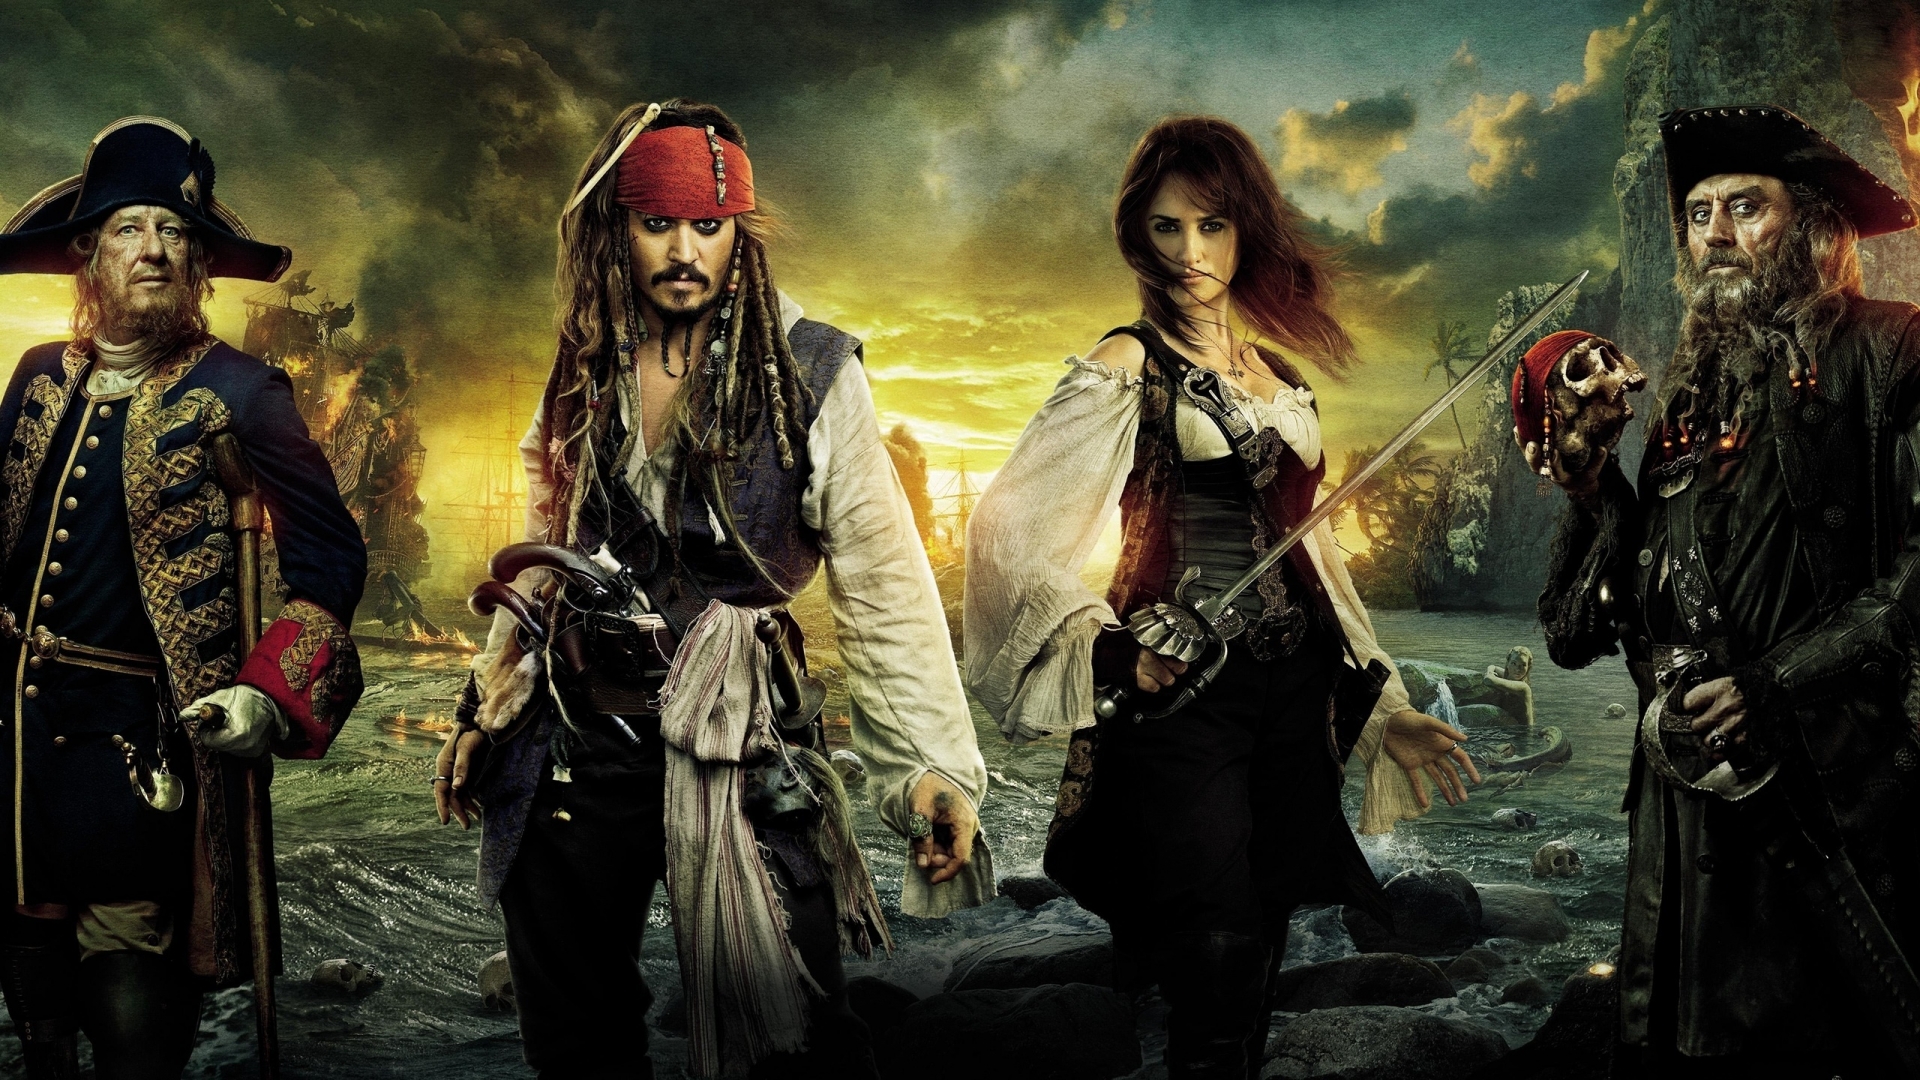 Pirates of the Caribbean Characters for 1920 x 1080 HDTV 1080p resolution